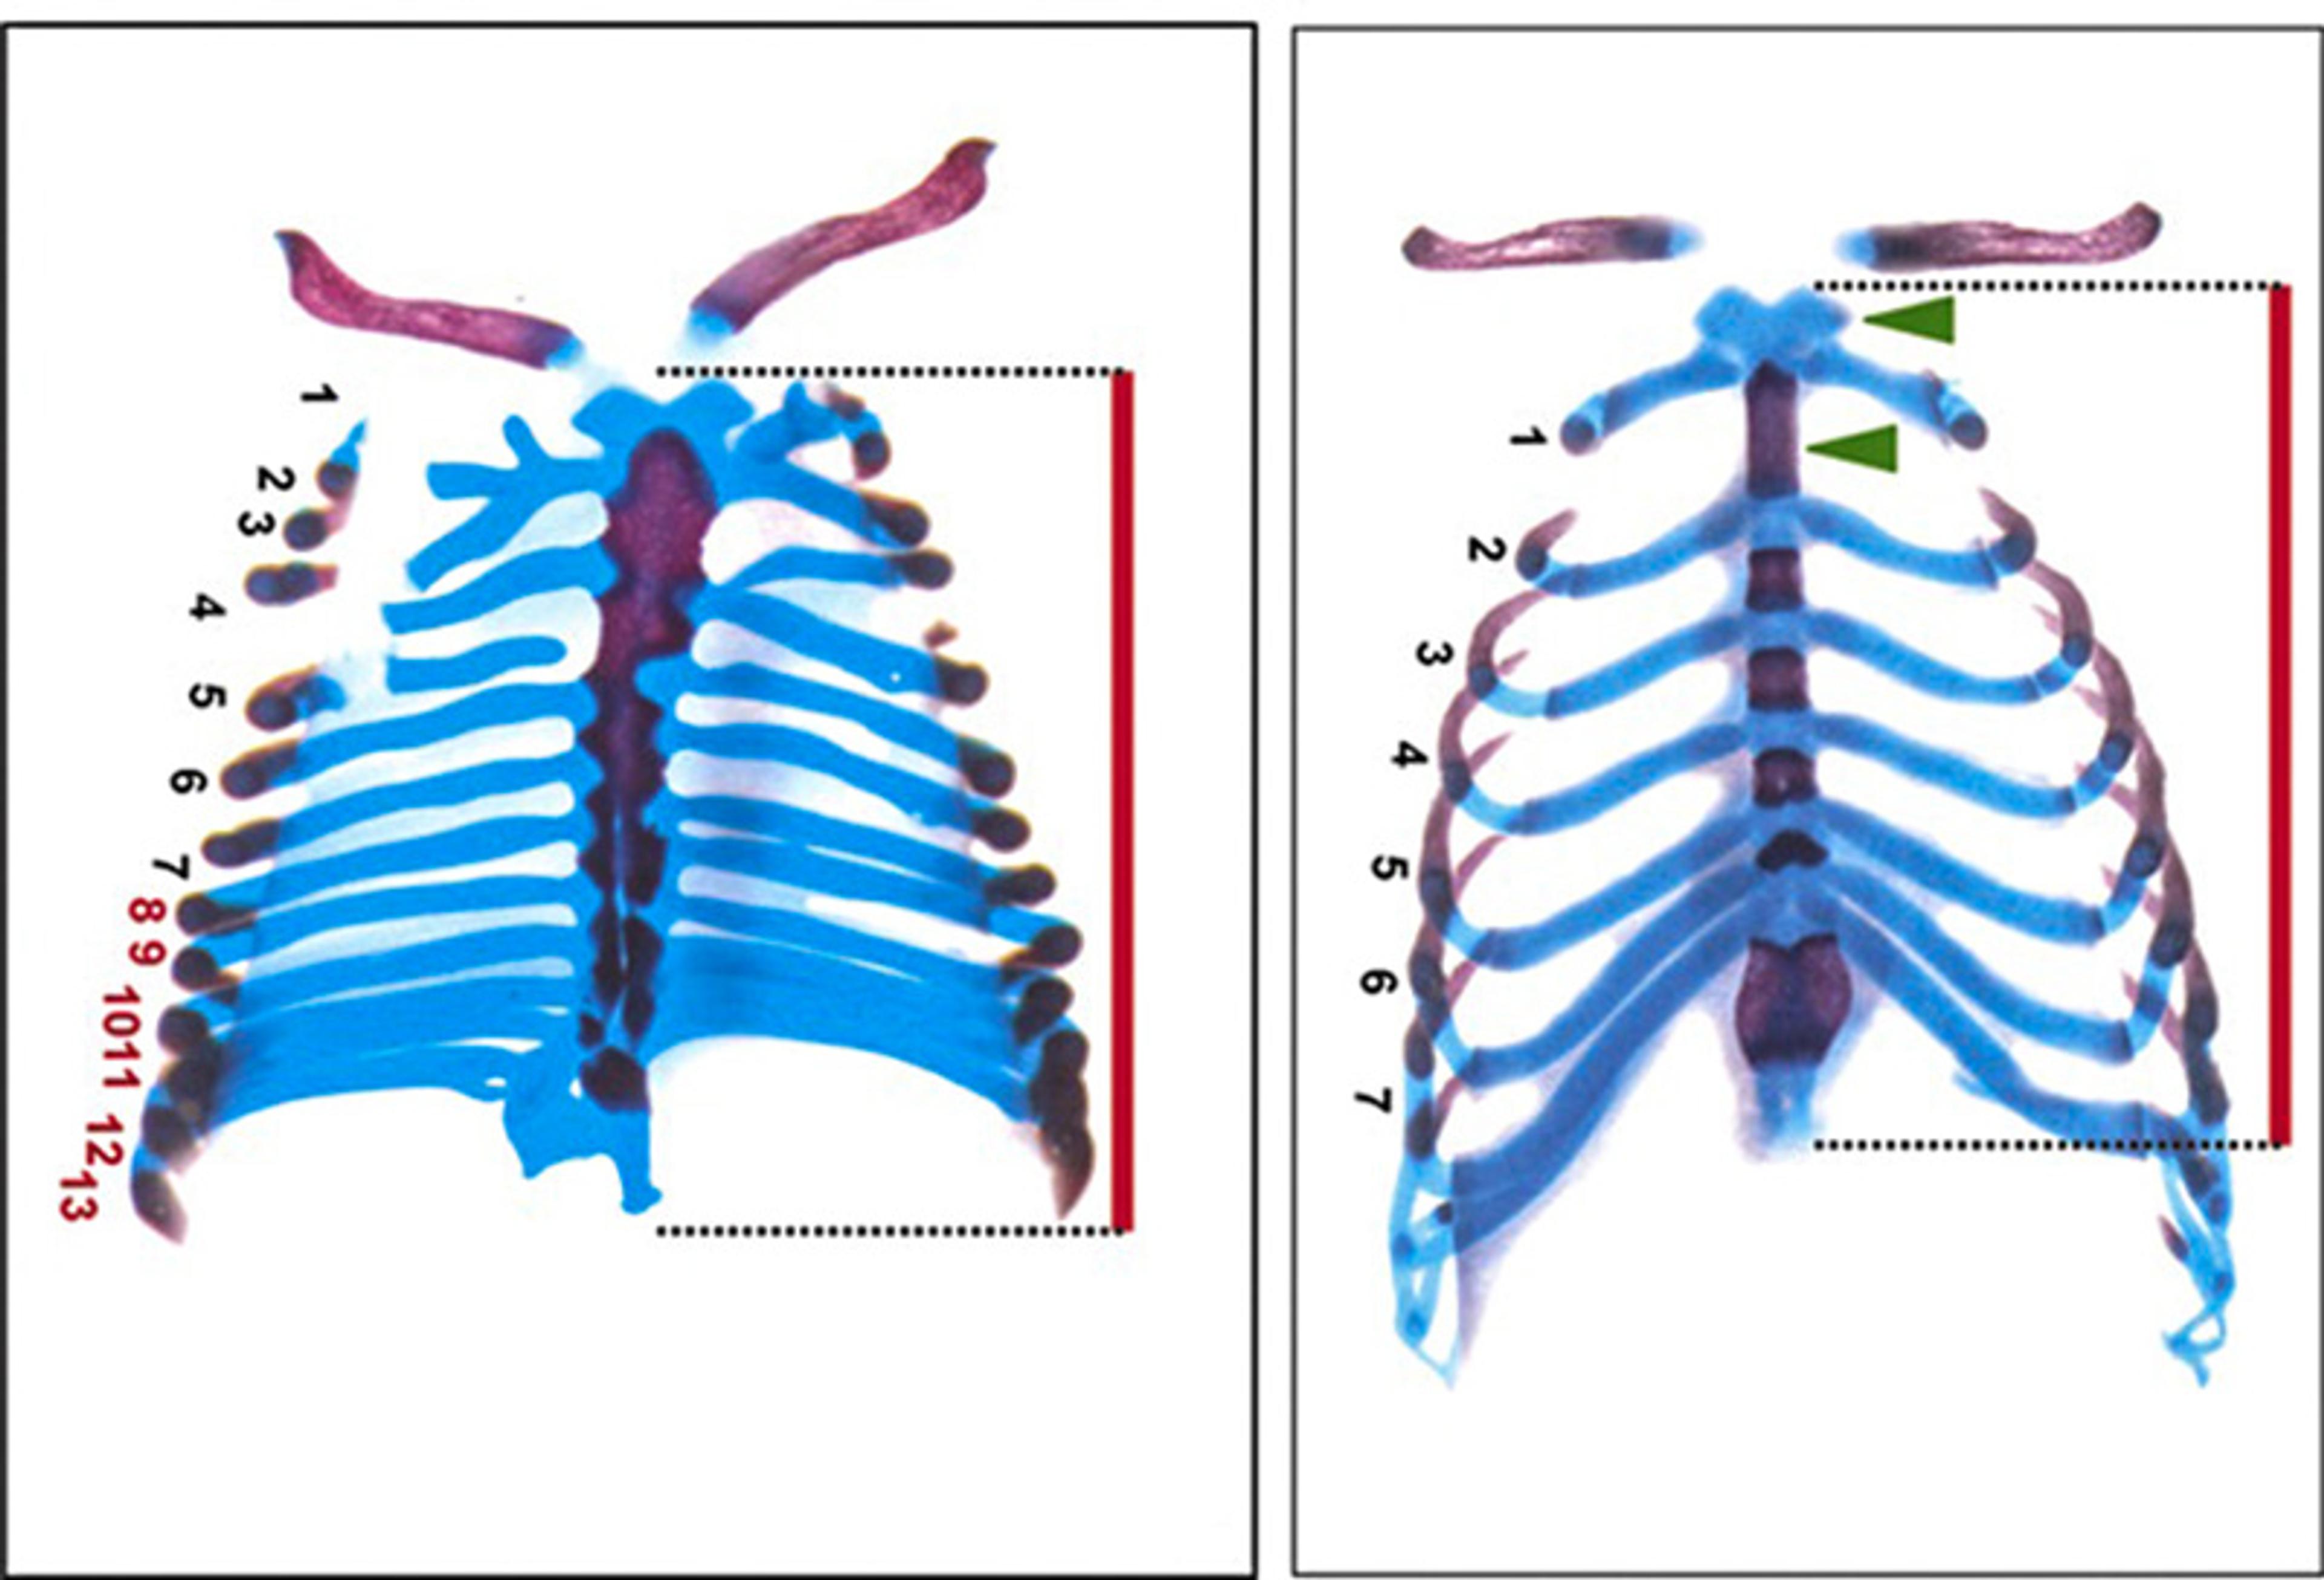 Side-by-side comparison of two coloured skeletal images showing differences in rib and vertebrae structure, with labels from 1 to 13 on the left and 1 to 7 on the right. The left image has more ribs and shows detailed vertebrae sections, while the right has fewer ribs and green markers.